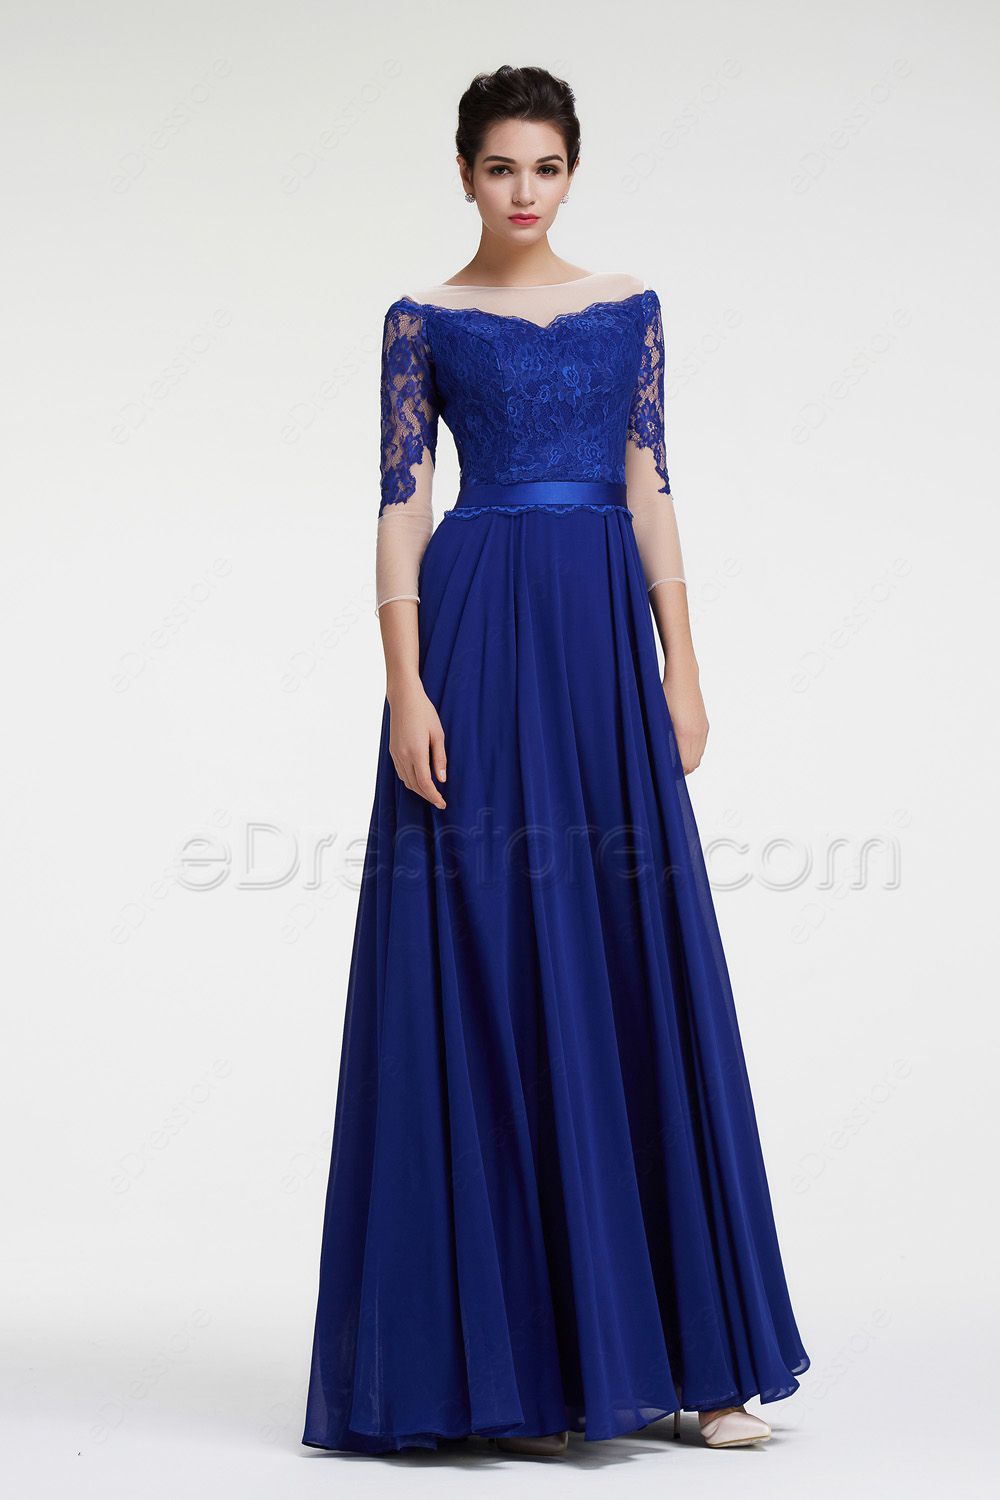 Royal Blue Lace Mother of the Bride Dresses with Sleeves | eDresstore